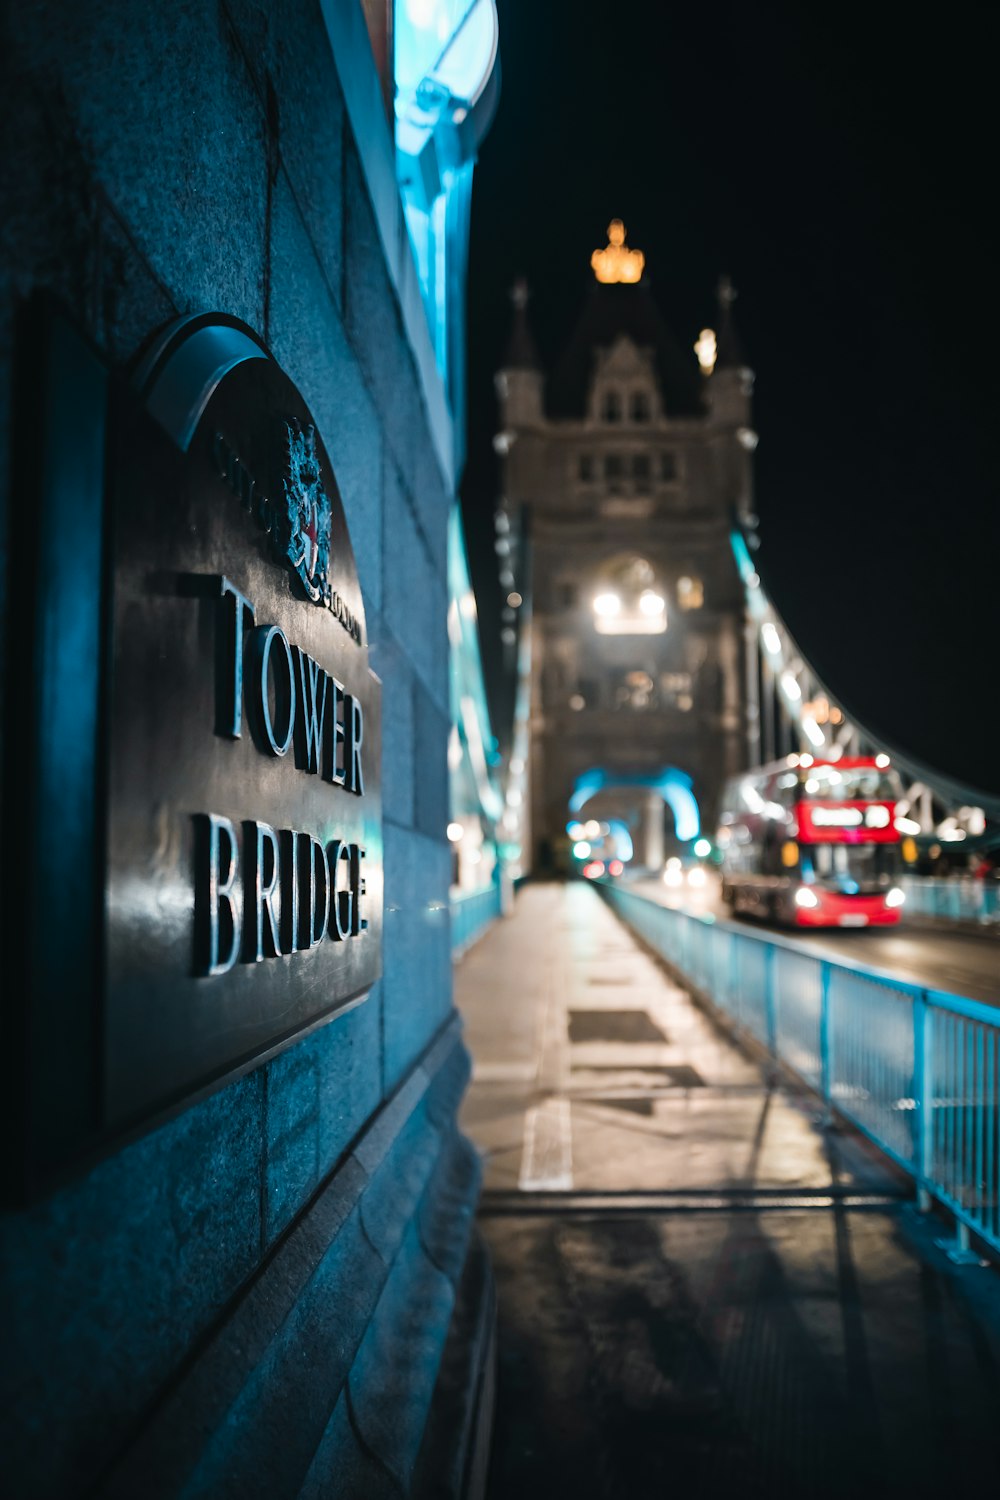 the tower bridge sign is lit up at night